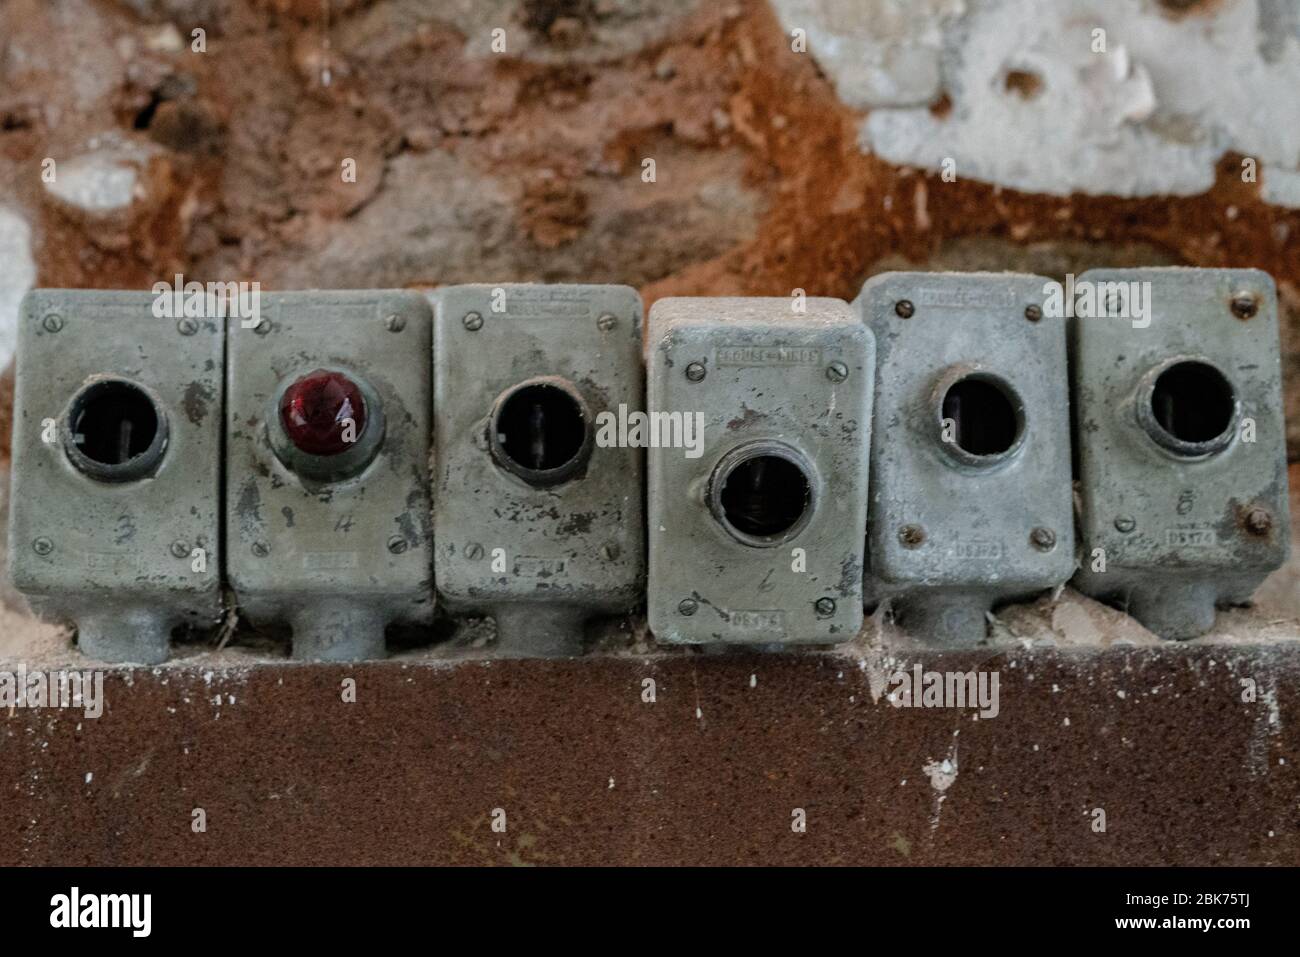 Old power buttons at Eastern State Penitentiary in Philadelphia, Pennsylvania, which is a former prison that functioned from 1829 to 1971. Stock Photo